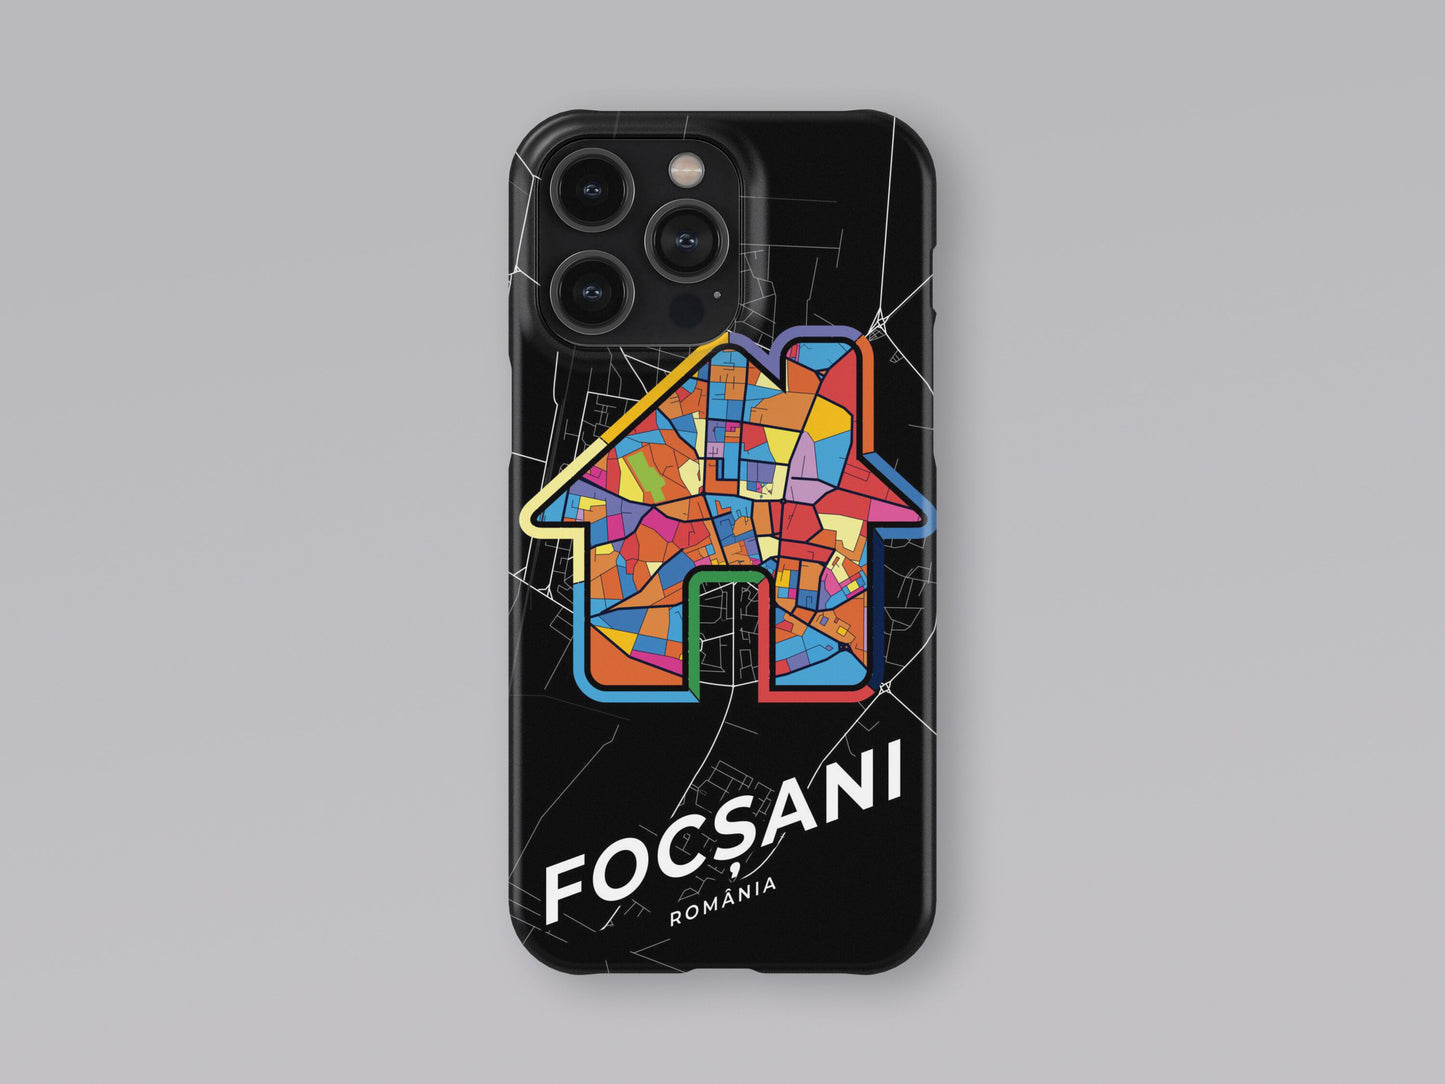 Focșani Romania slim phone case with colorful icon. Birthday, wedding or housewarming gift. Couple match cases. 3